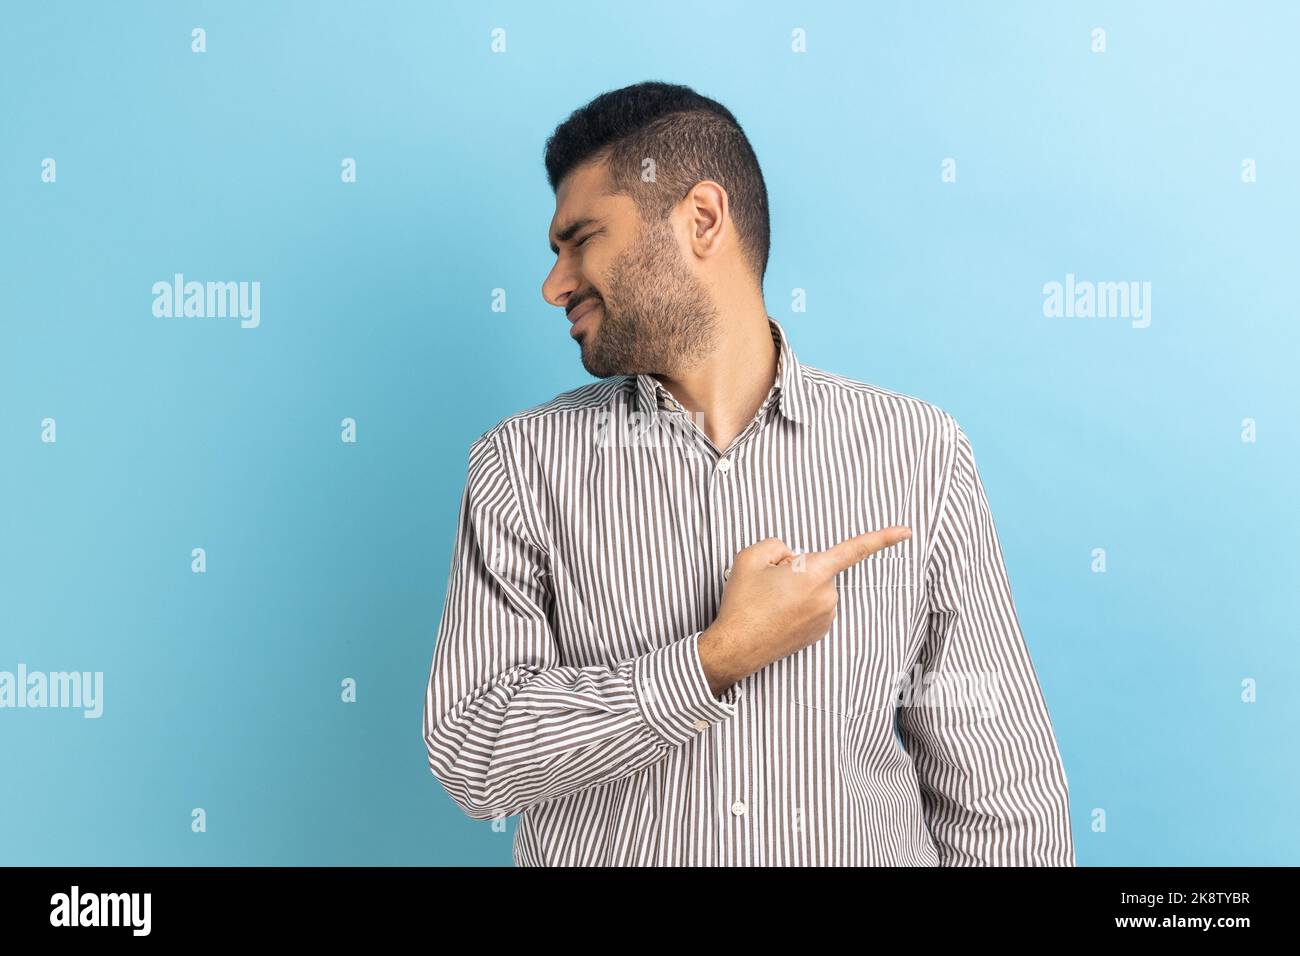 Get out. Portrait of serious angry businessman pointing finger, sneak male blaming another people, turning face, wearing striped shirt. Indoor studio shot isolated on blue background. Stock Photo